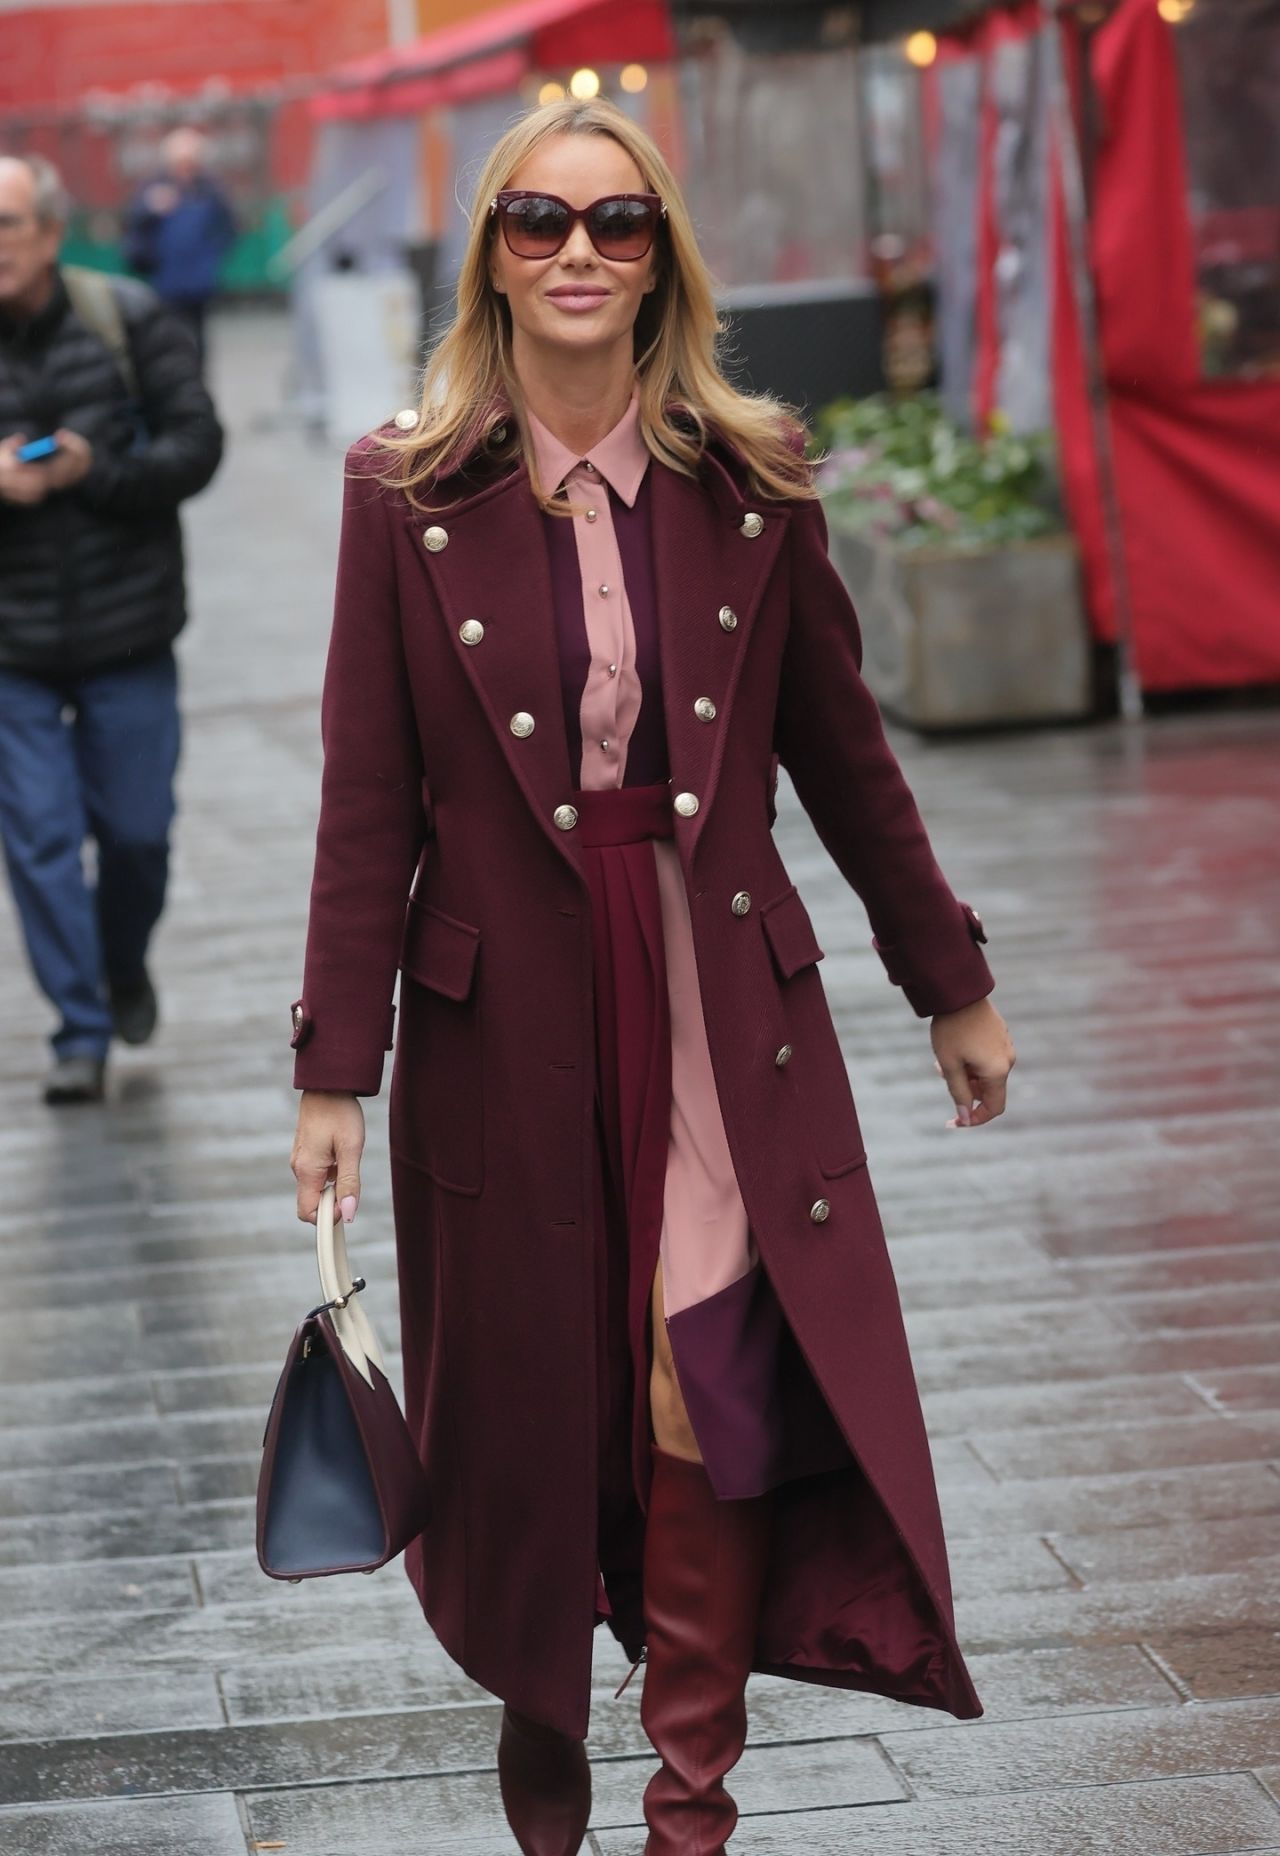 Amanda Holden in a Burgundy Coat and Matching Boots - London 02/04/2022 ...